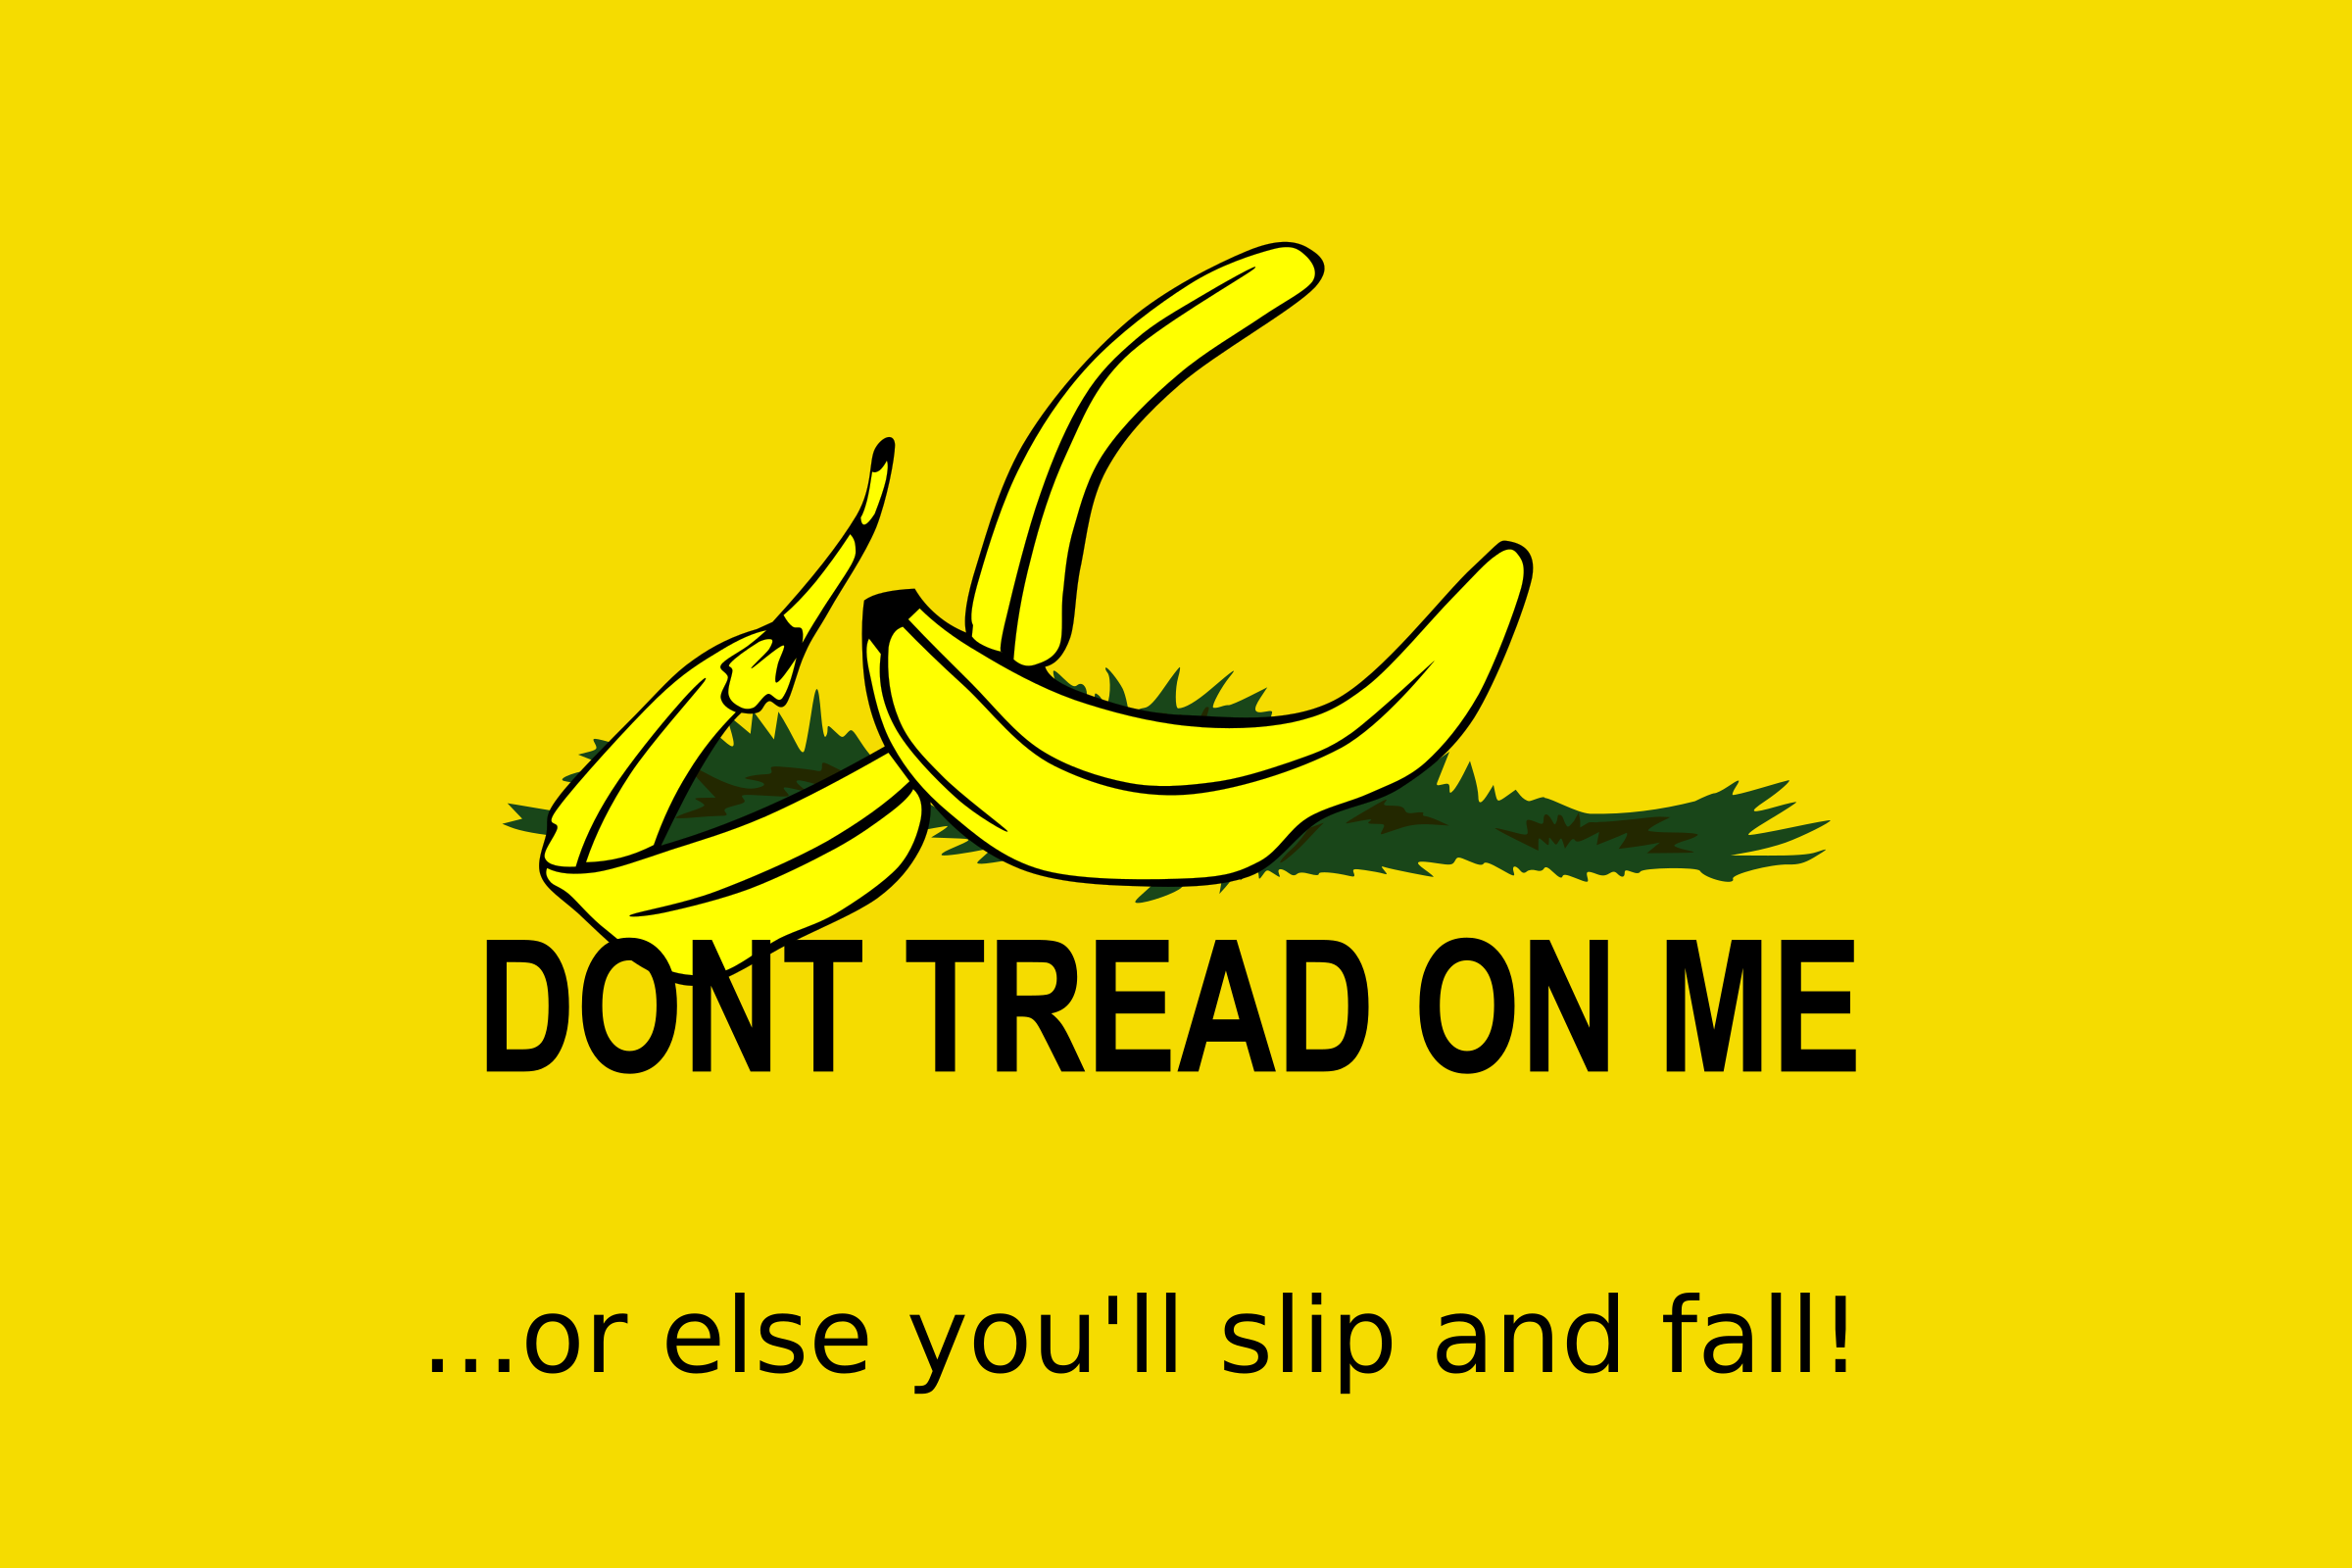 don-t-tread-on-me-banana-peel-remix-by-nerd42-4P1vuc-clipart.png.